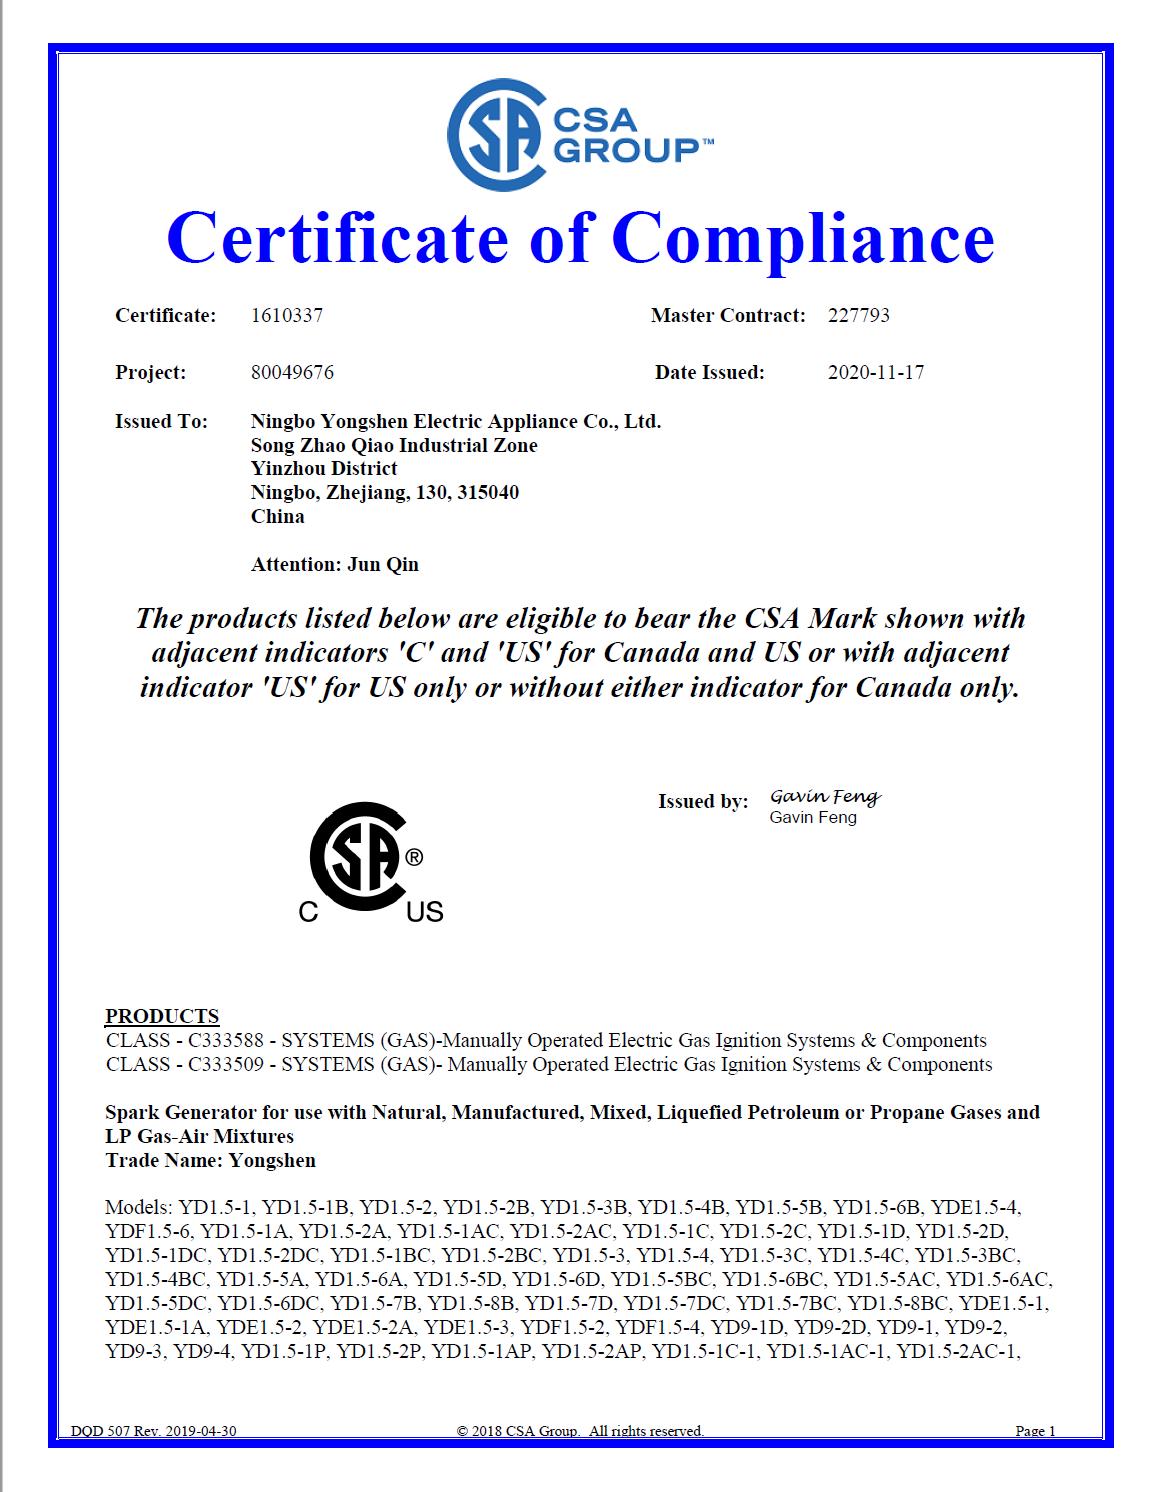 Ningbo Yongshen Electric Appliance Co., Ltd updated the CSA certification.